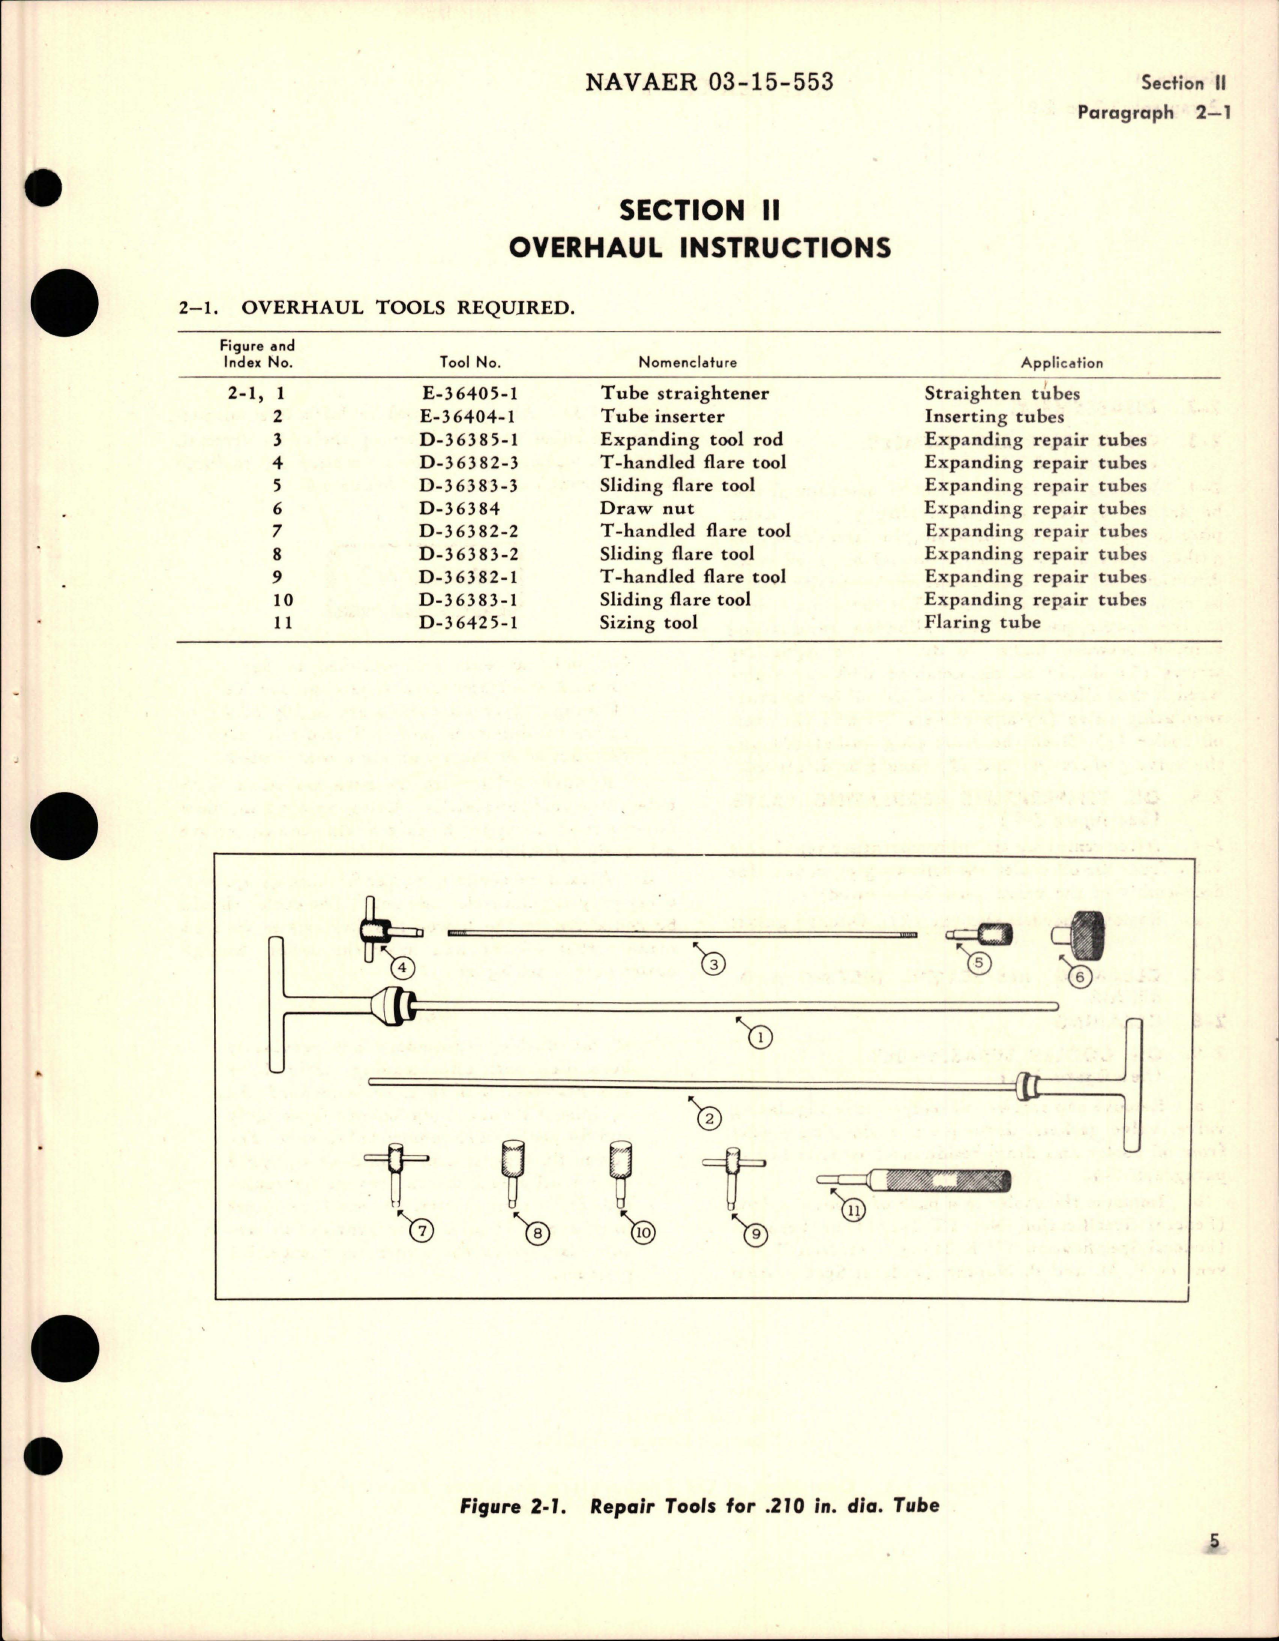 Sample page 7 from AirCorps Library document: Operation, Service, Overhaul Instructions with Parts Catalog for Oil Cooler Assembly - Model E-36778